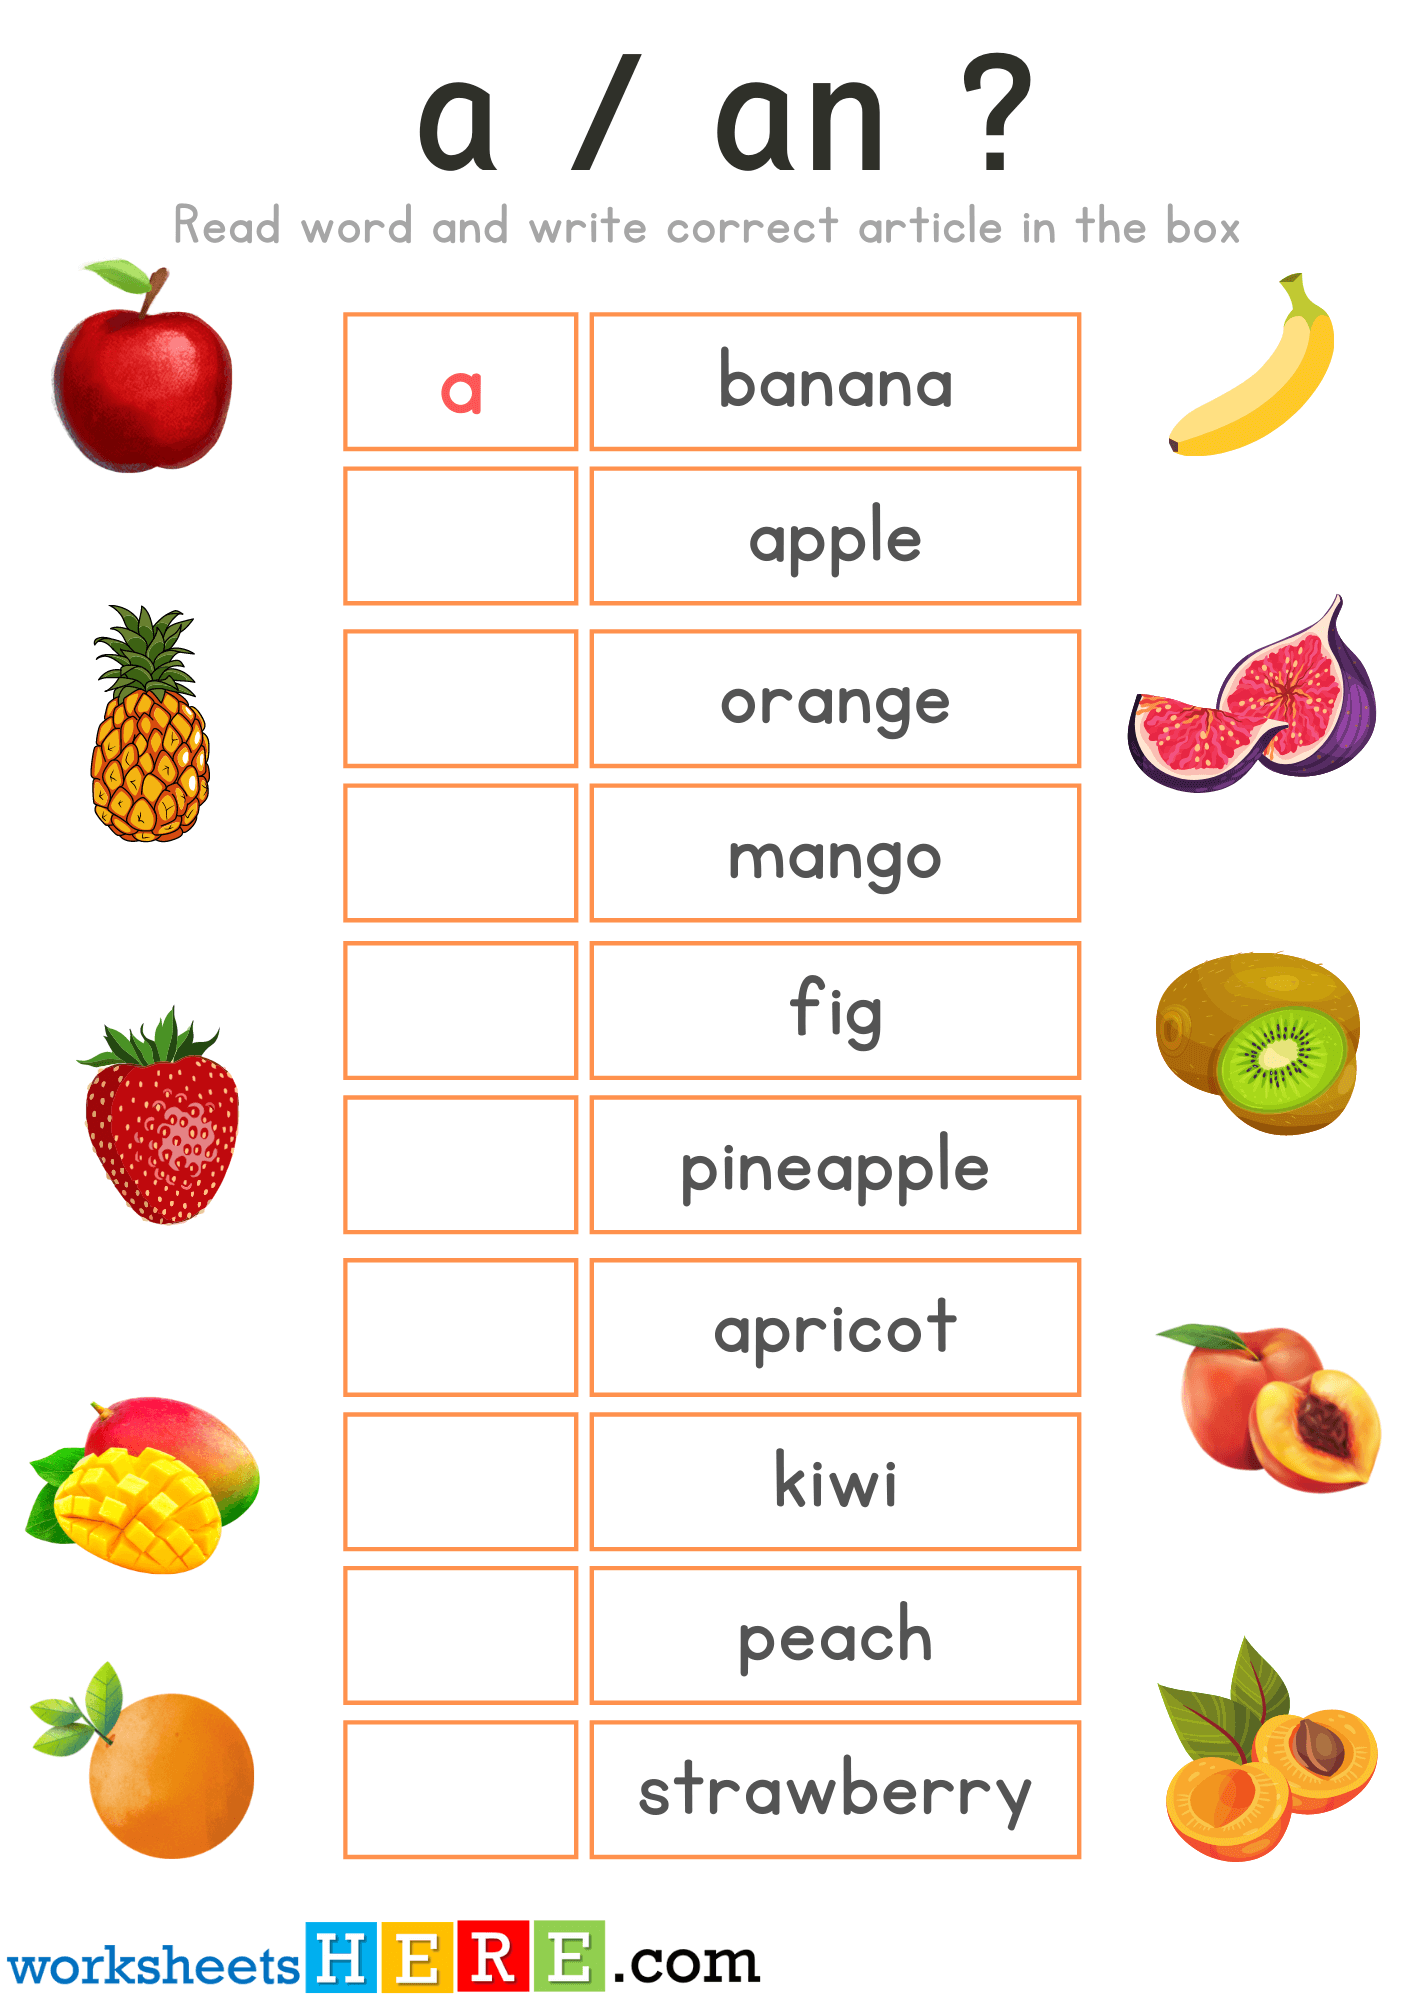 Articles Exercises with Fruits Names and Pictures, A or An PDF Worksheets For Students